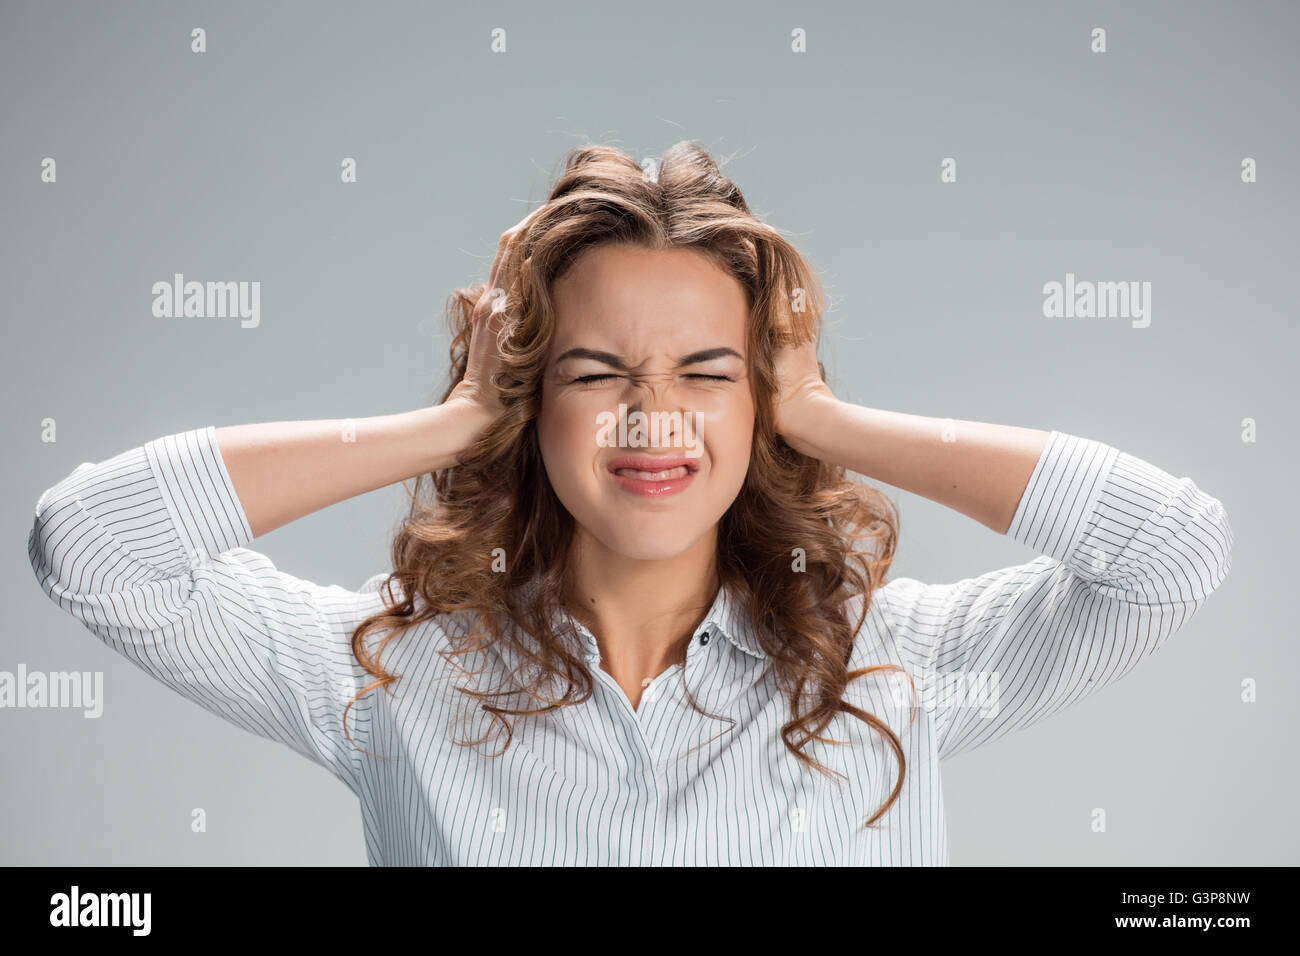 The young woman's portrait with pain emotions Stock Photo